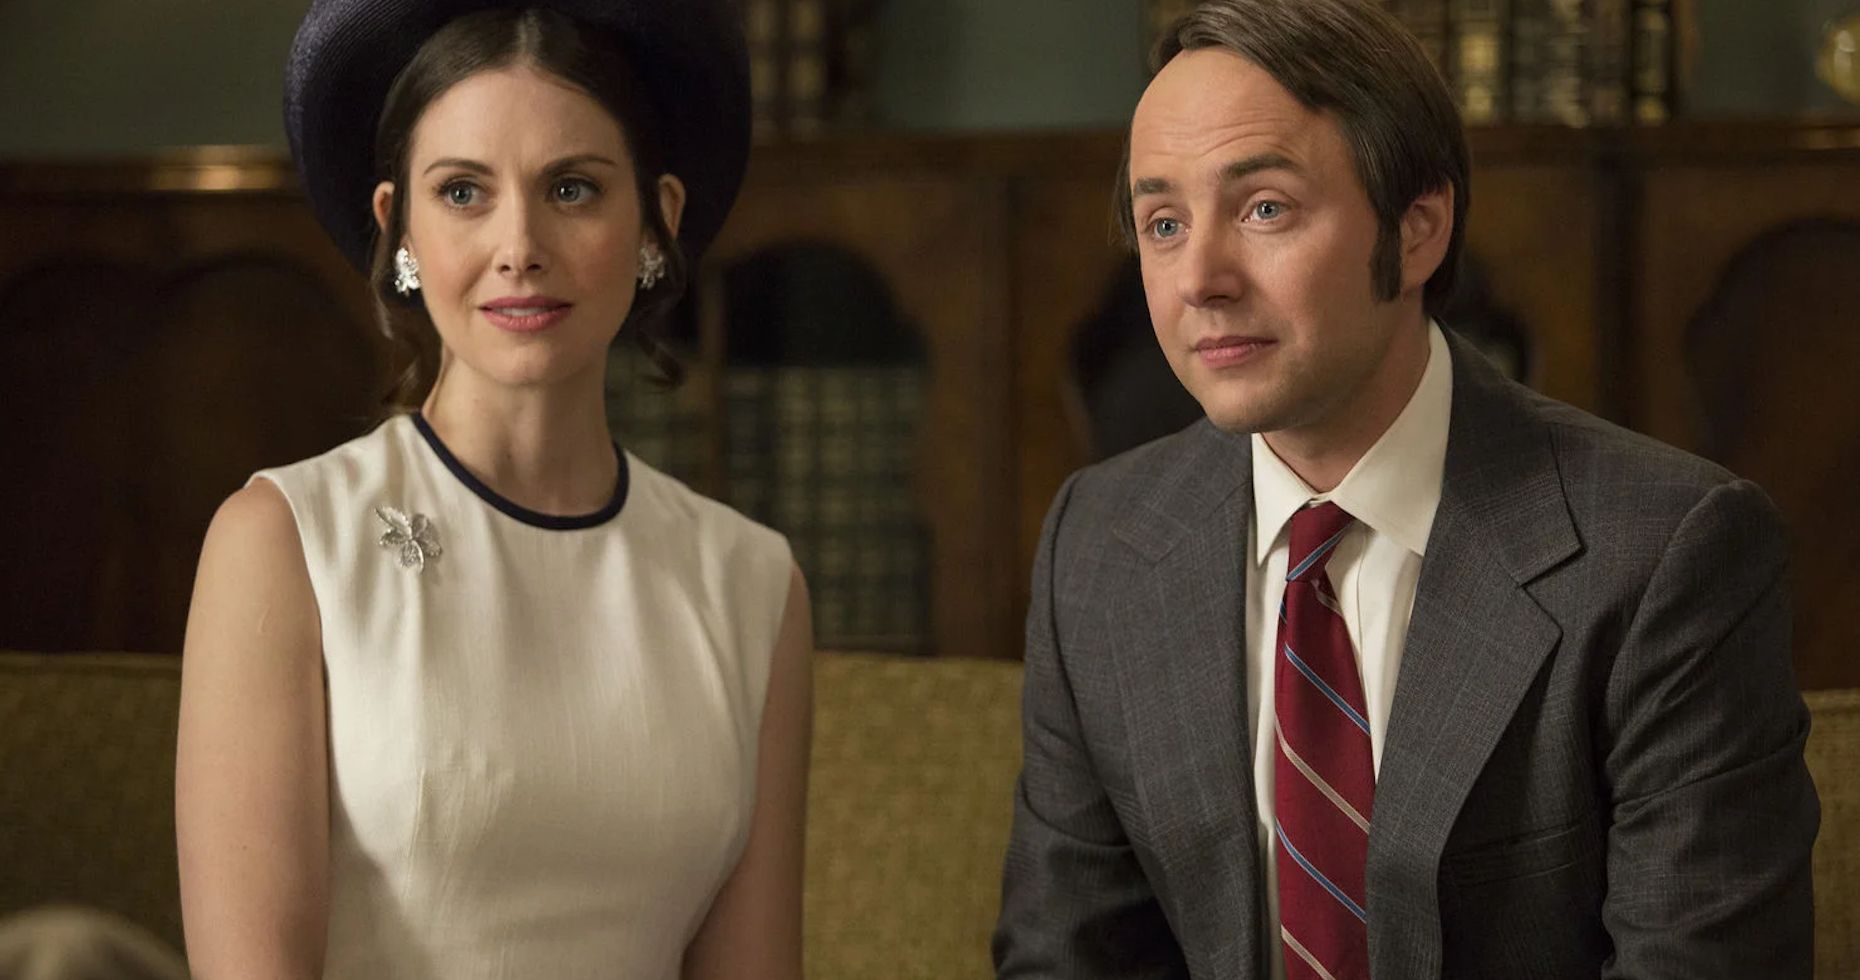 Alison Brie Reveals Embarrassing Mad Men Behind-The-Scenes Story